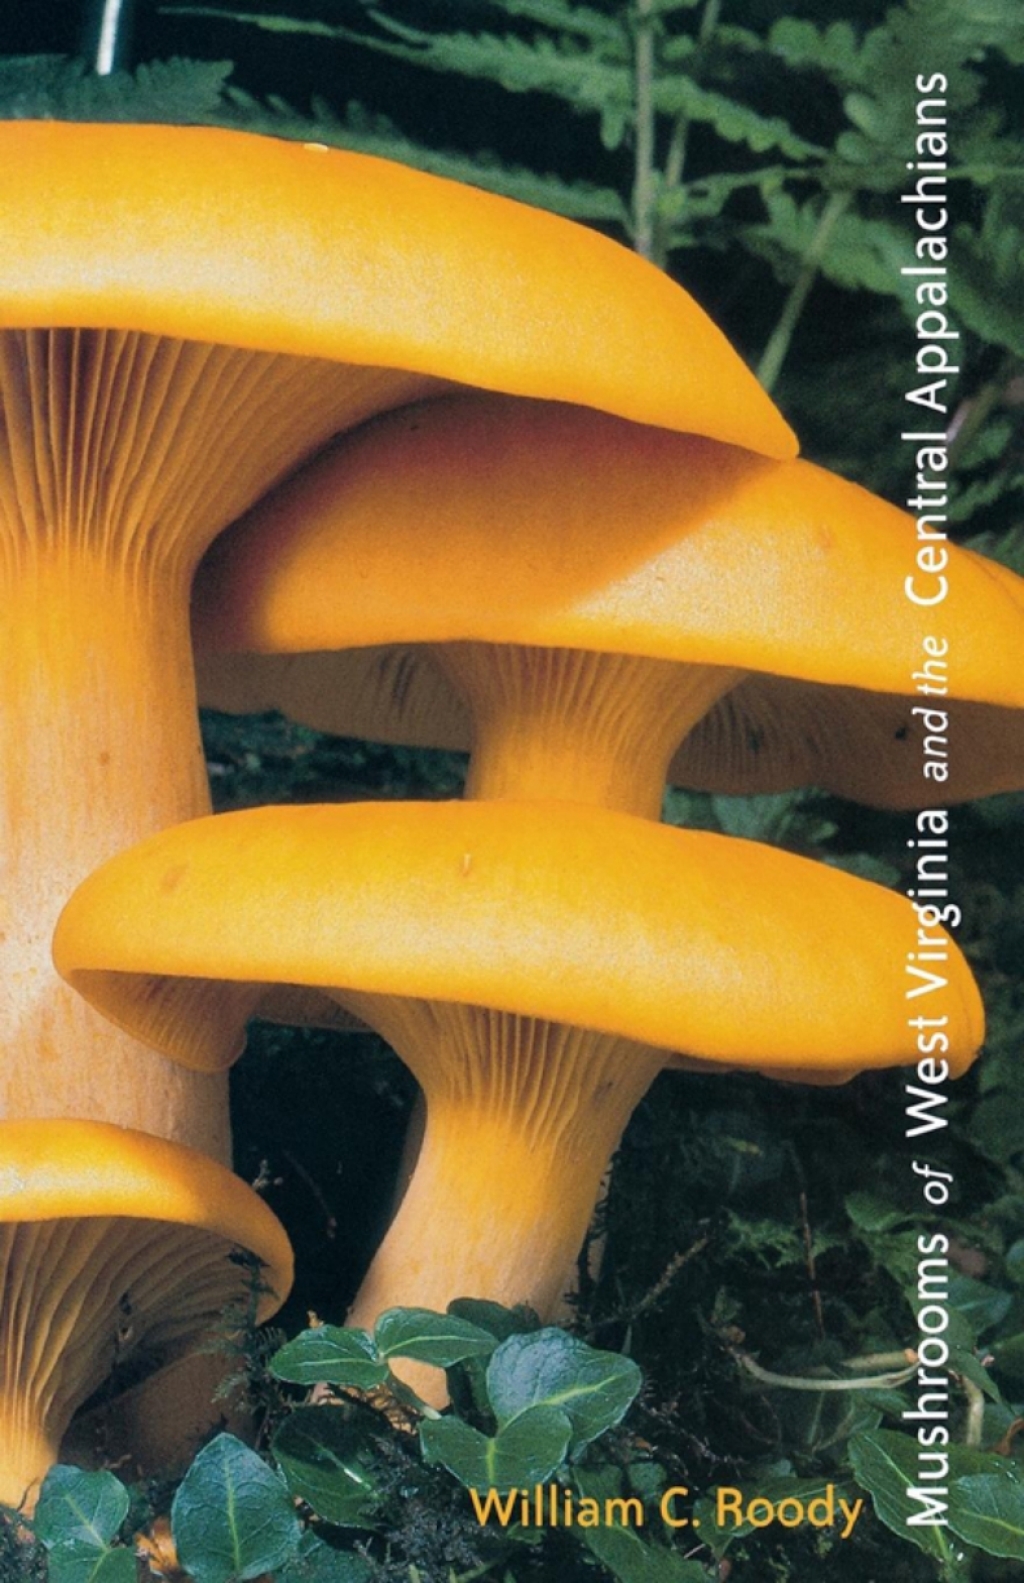 Mushrooms of West Virginia and the Central Appalachians (eBook) - William C. Roody